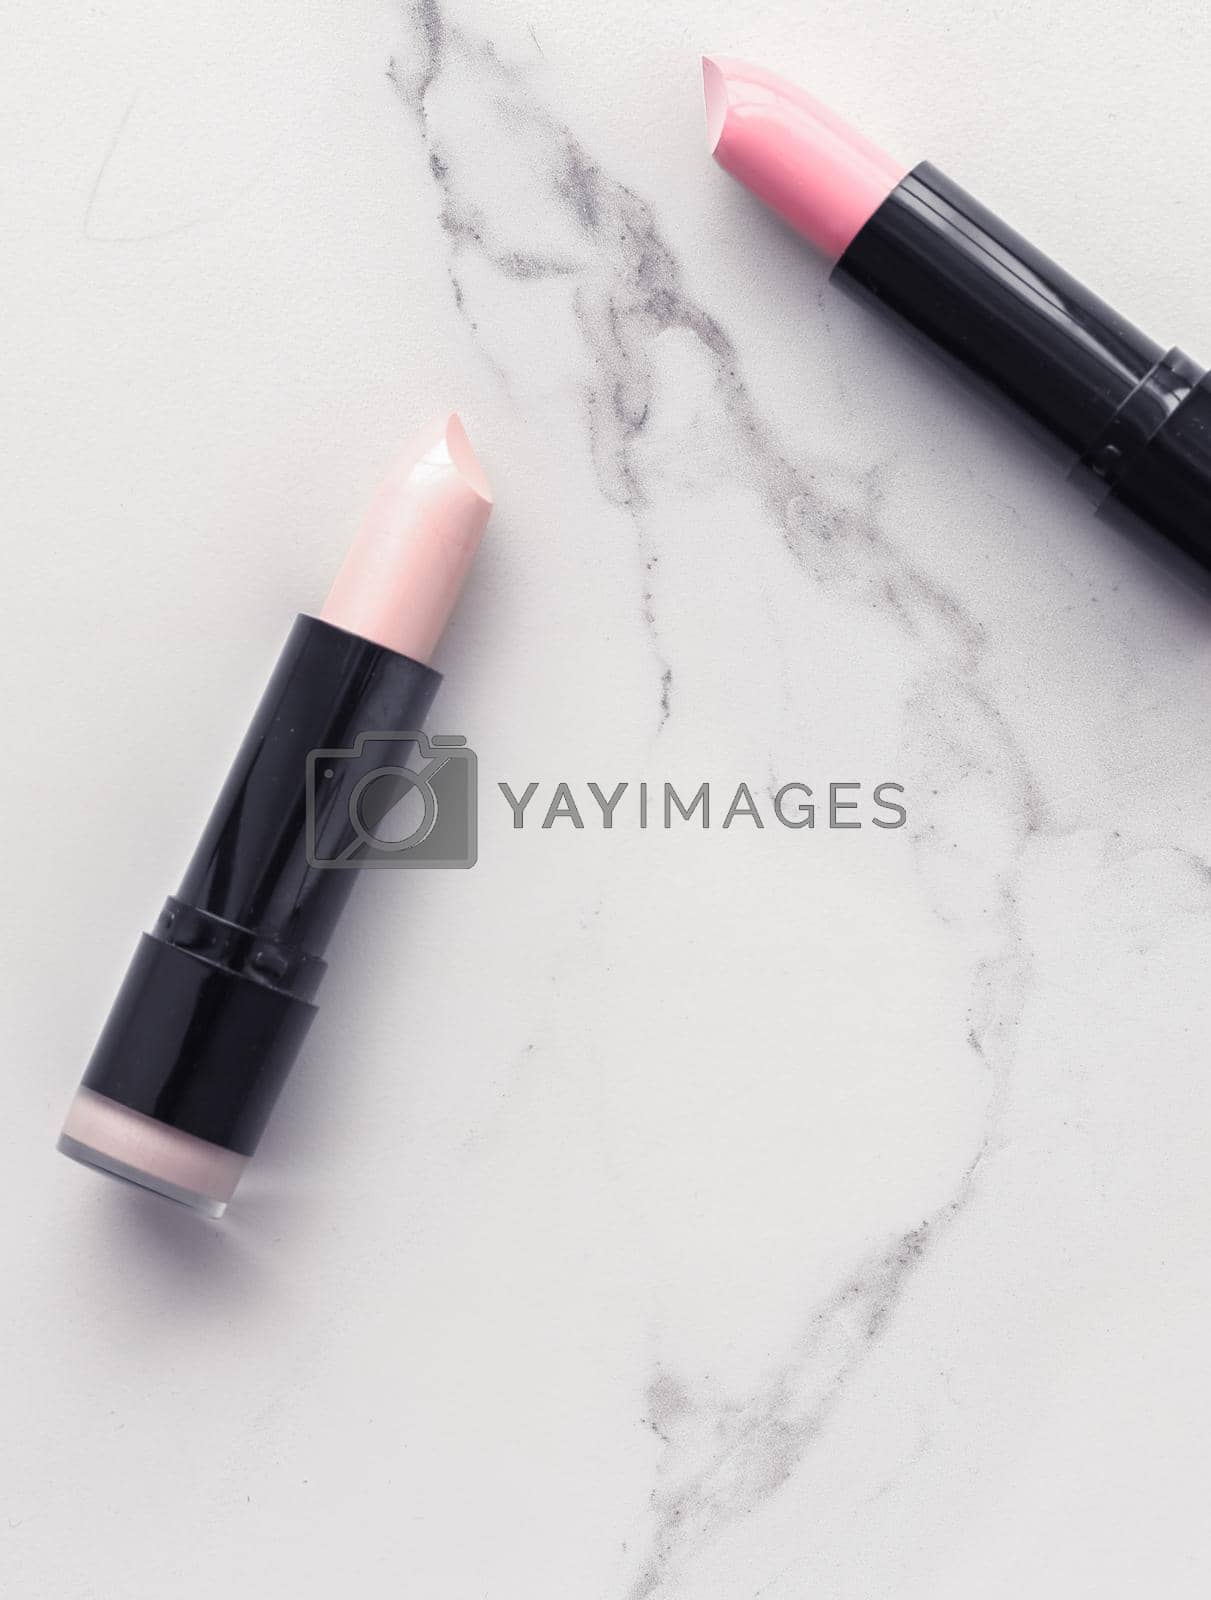 Royalty free image of Make-up and cosmetics flatlay on marble by Anneleven